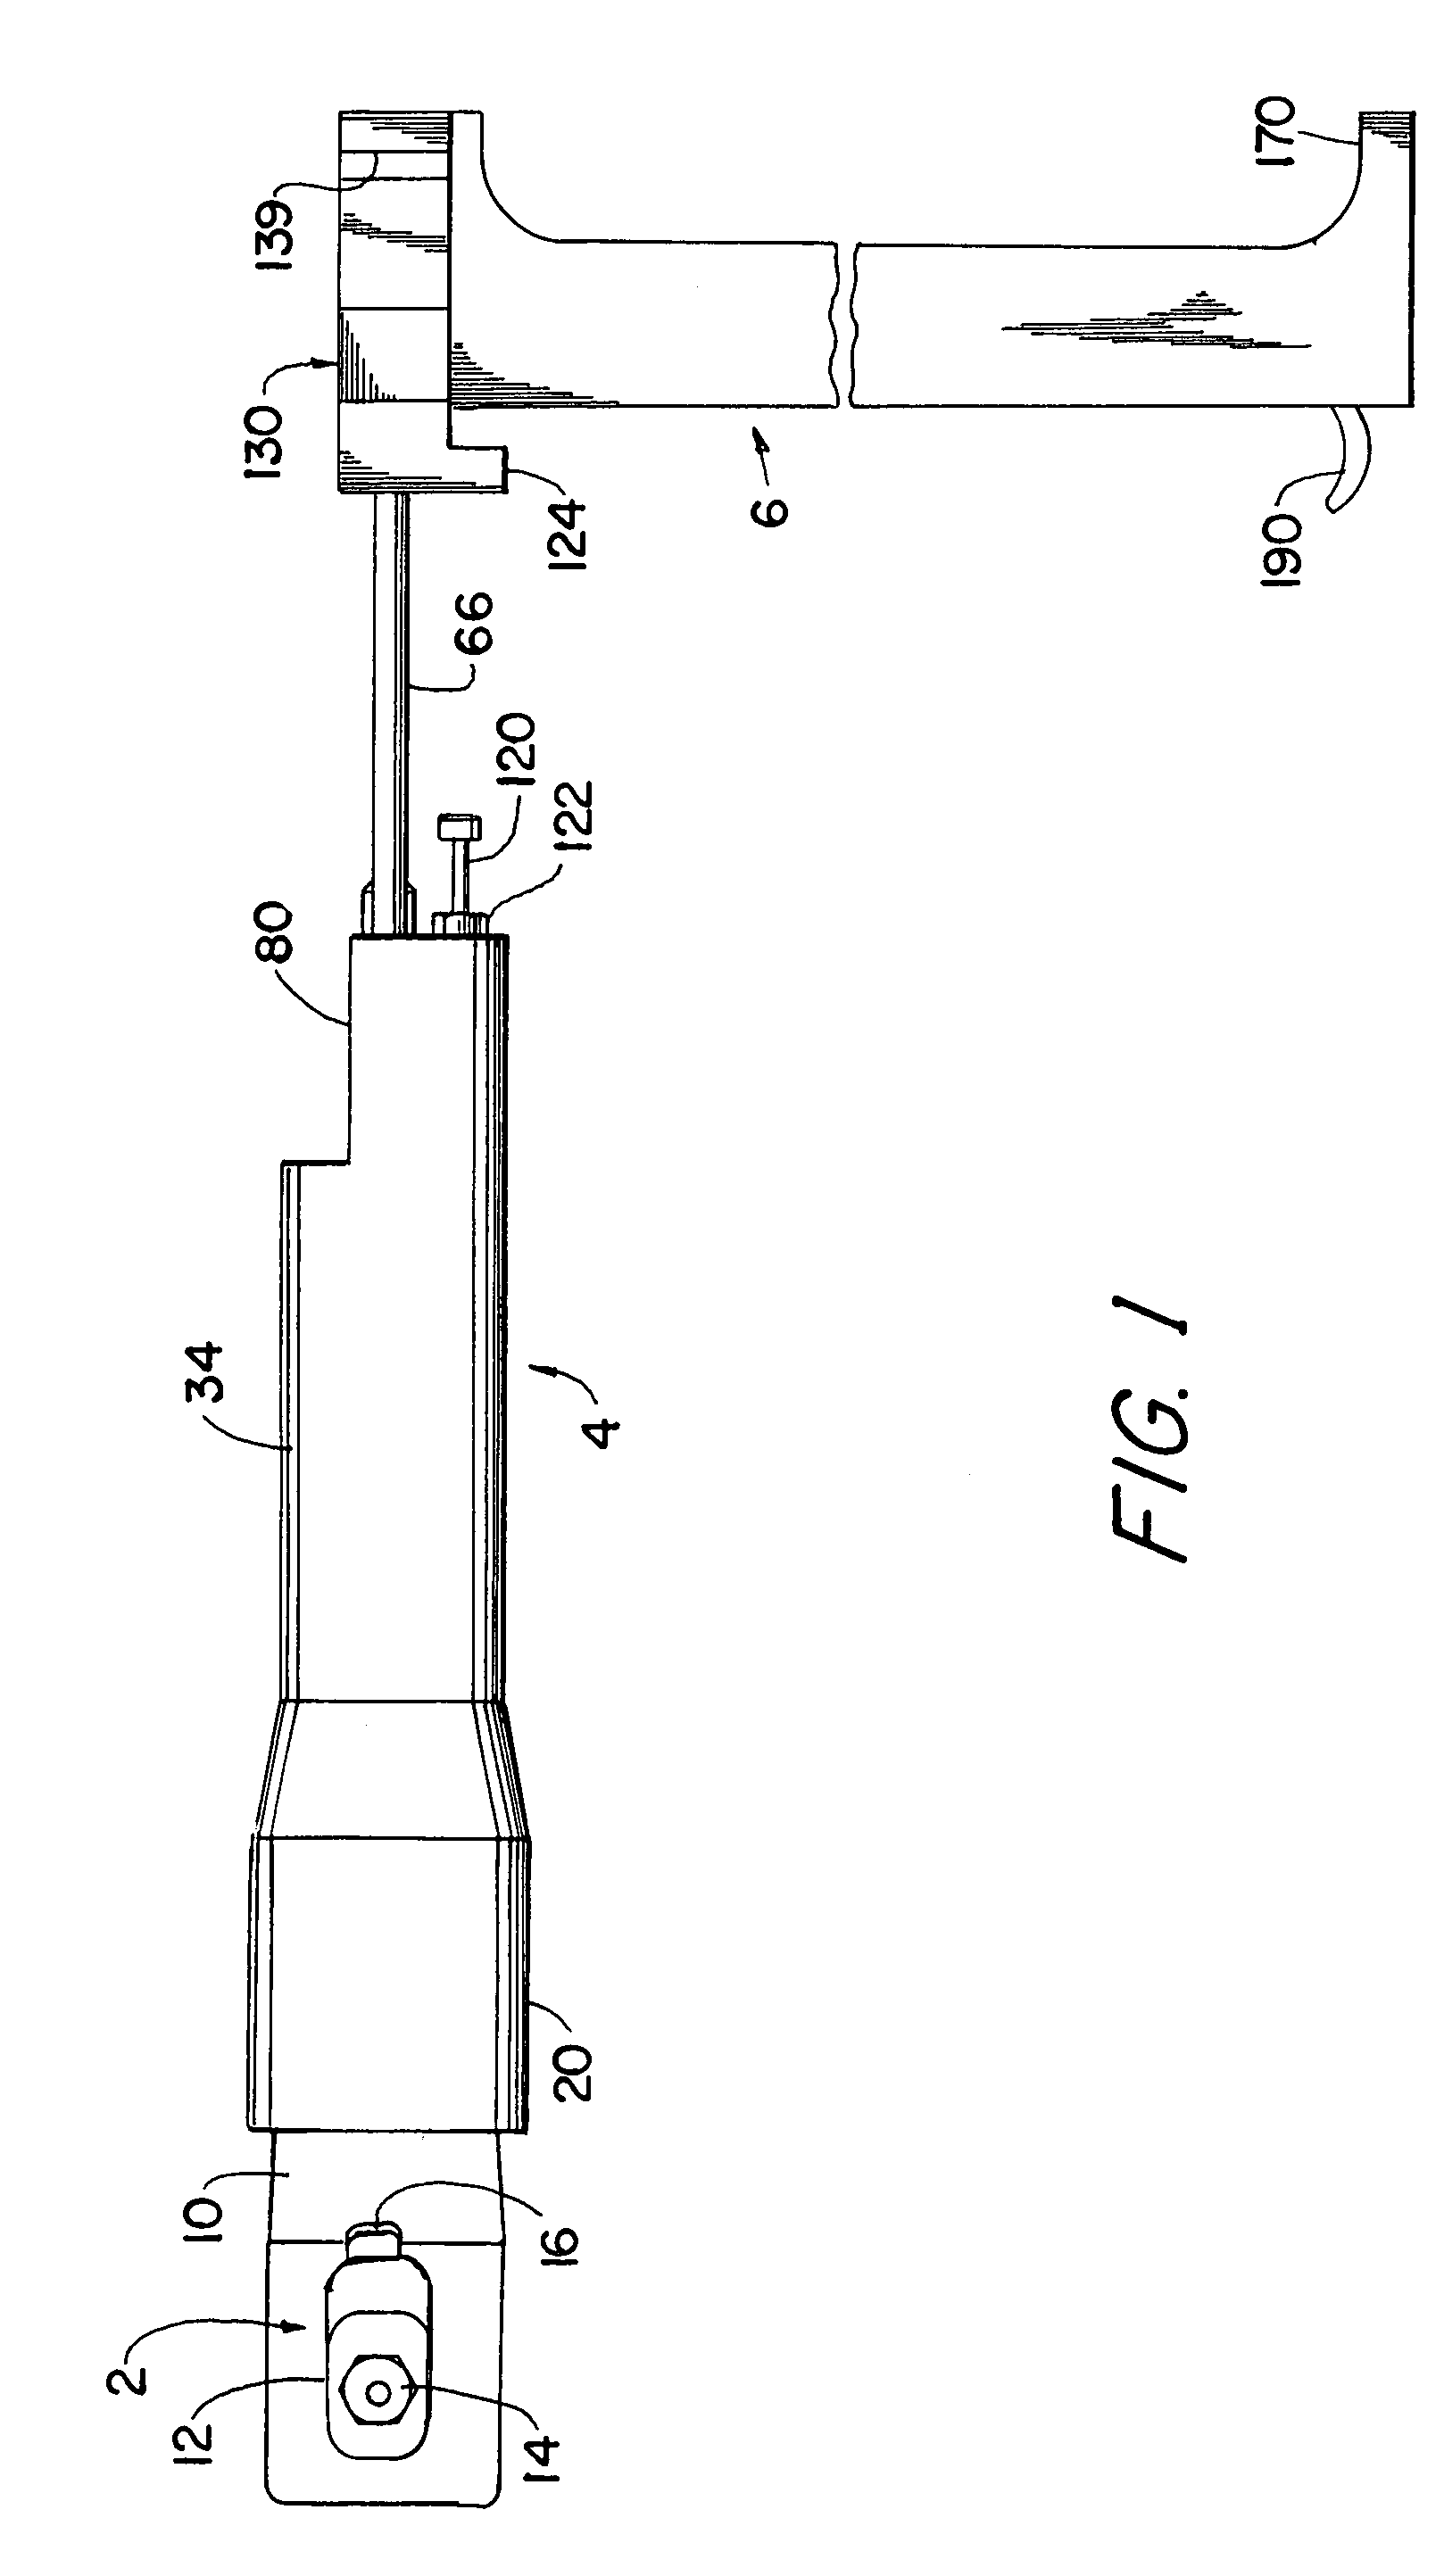 Method and apparatus for fastening together structural components